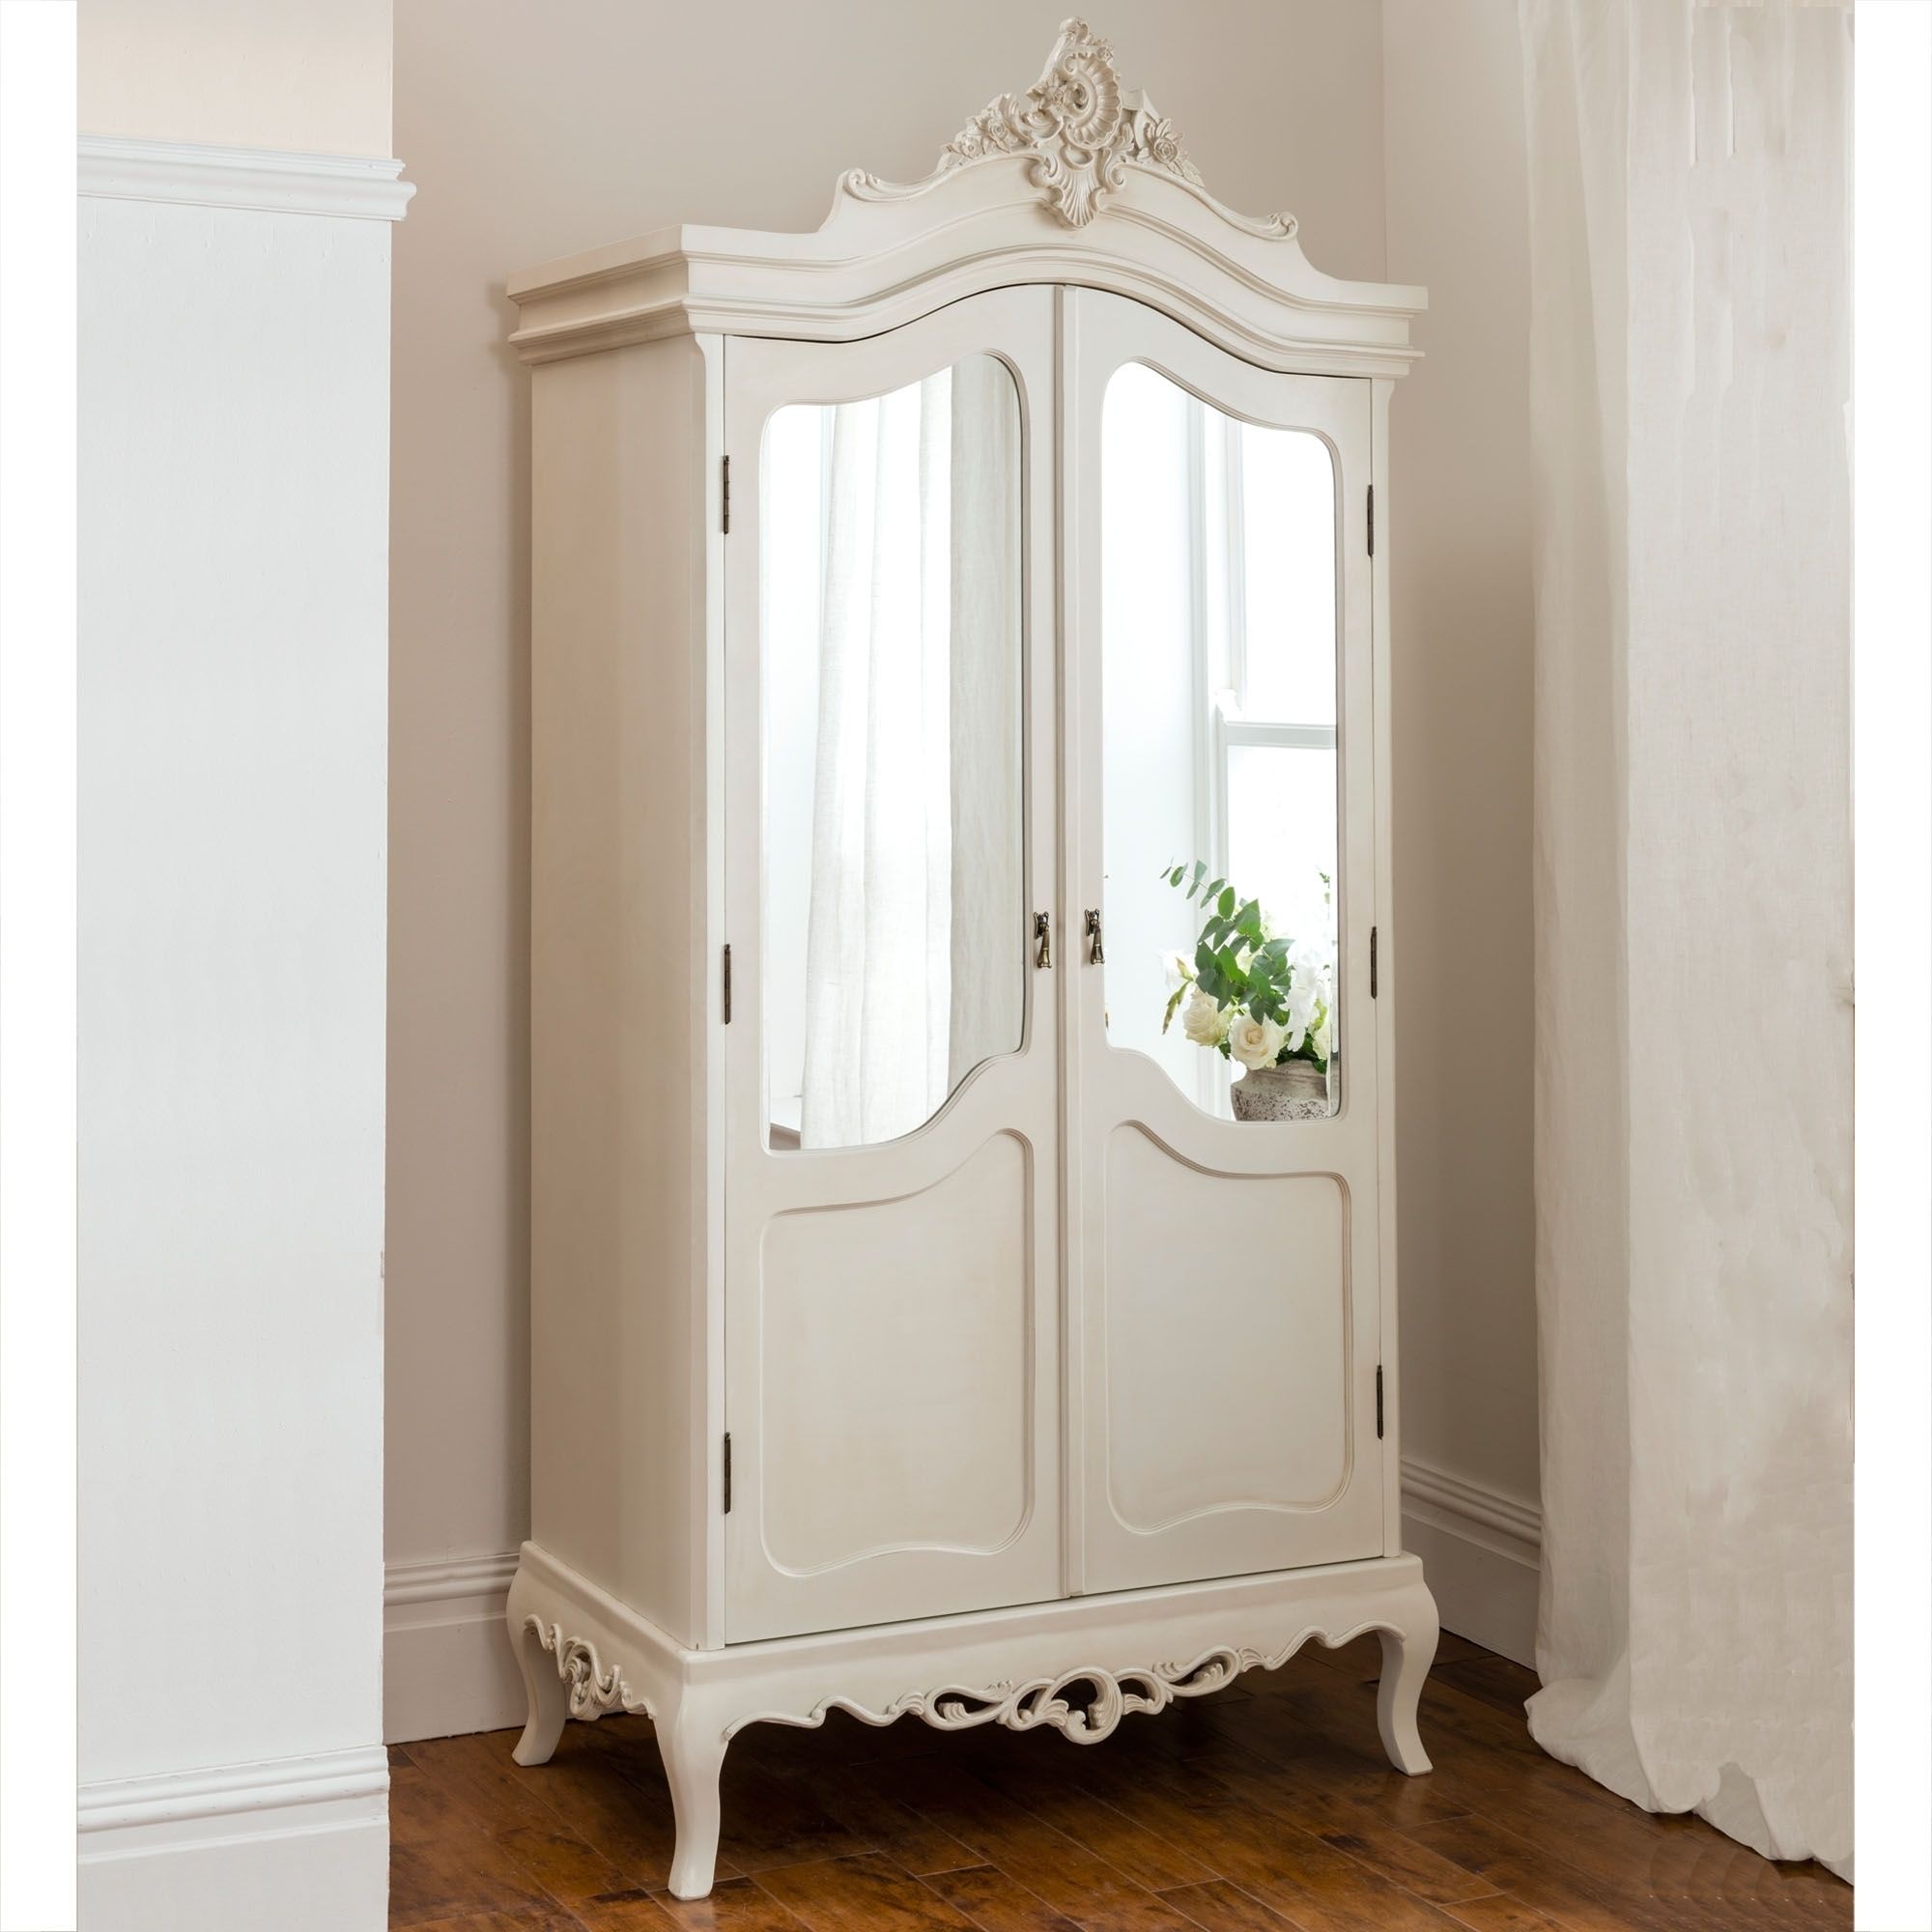 Annaelle Antique French Wardrobe Intended For French White Wardrobes (View 4 of 15)